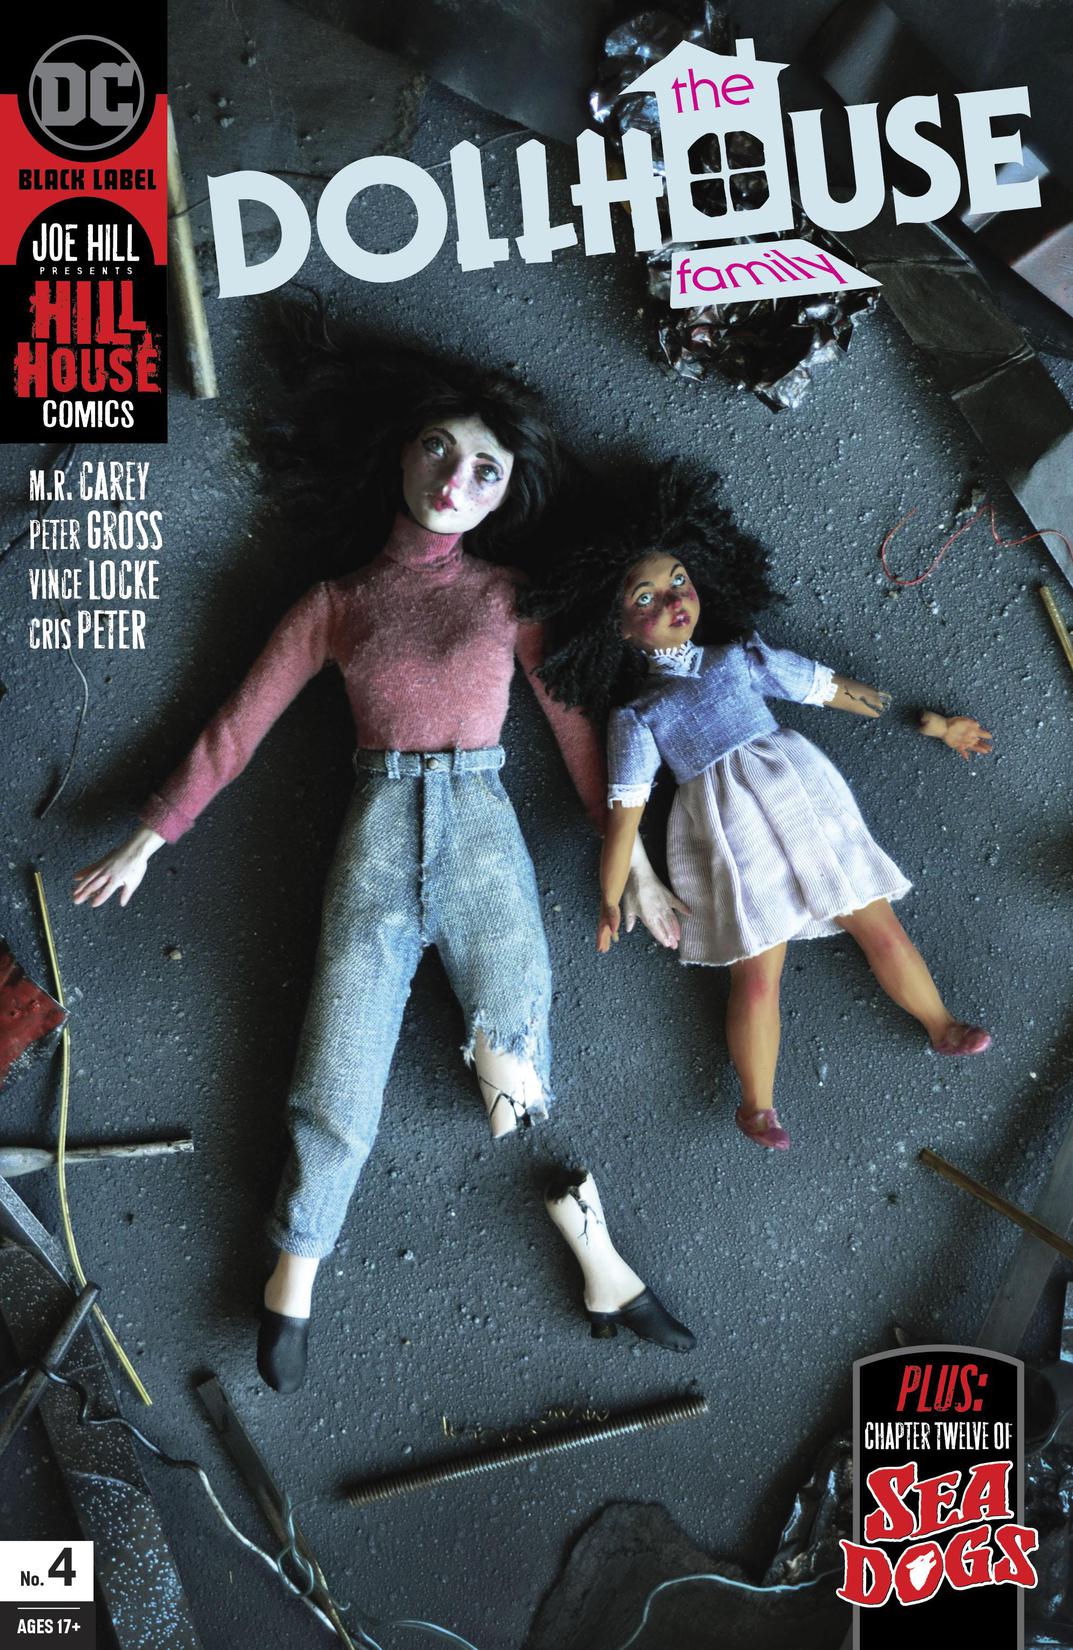 The Dollhouse Family #4 preview images